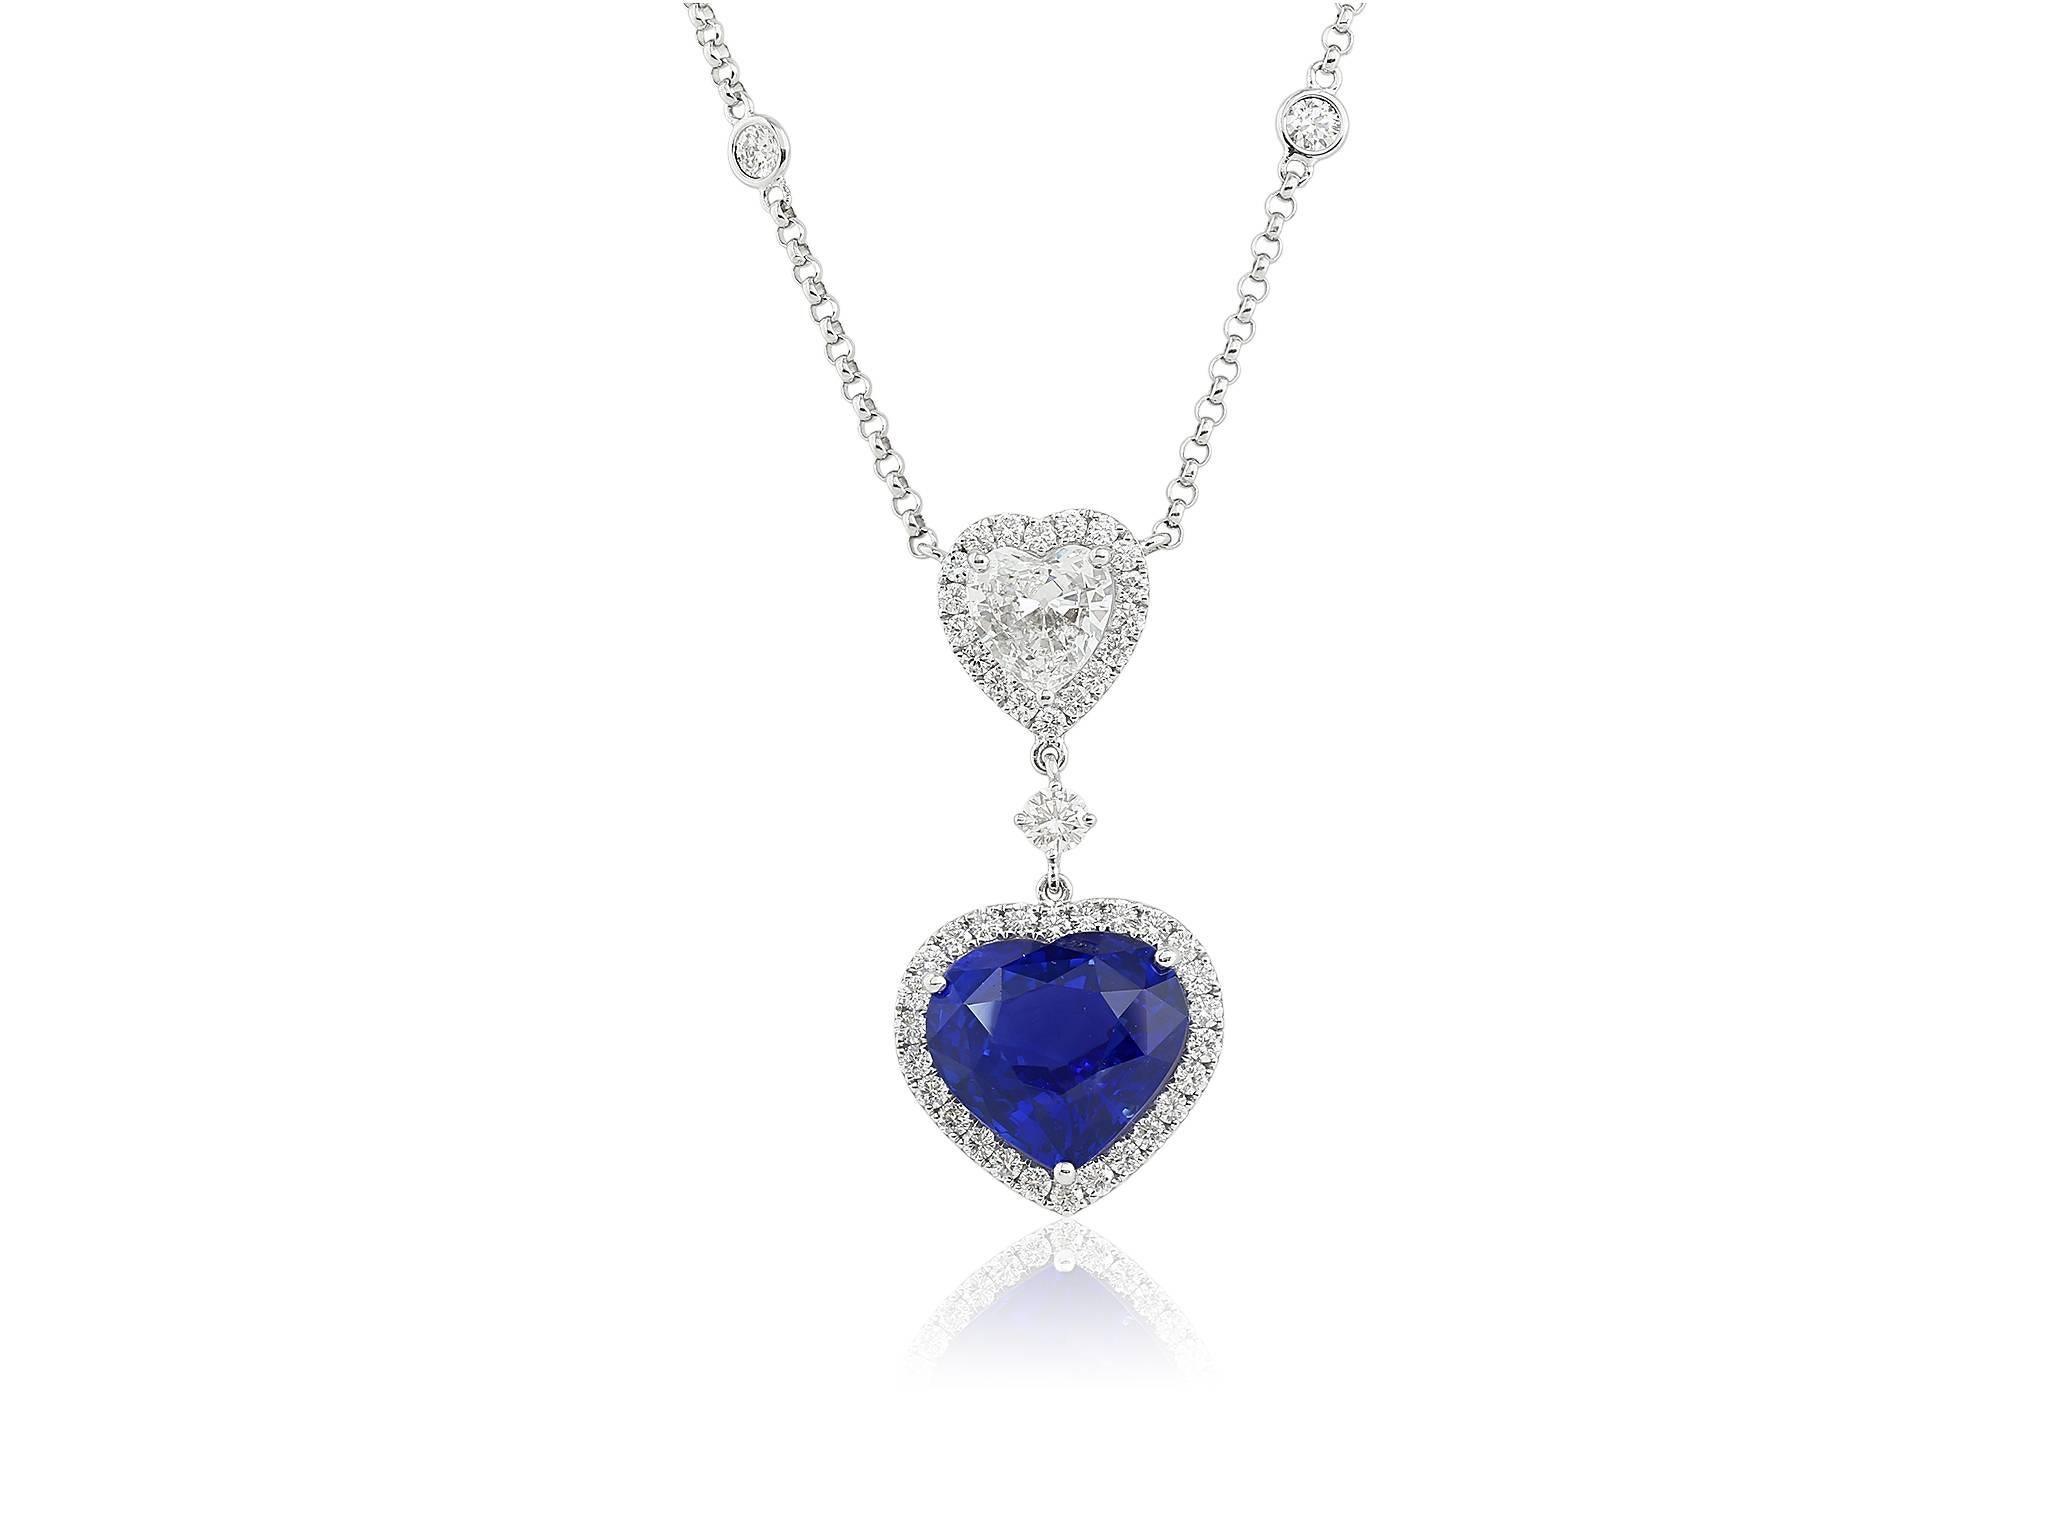 18 karat white gold necklace consisting of  1 natural heart shape sapphire from Sri Lanks having a total weight of 10.03 carats with a GIAa cert # 2155012646 surrounded by a diamond halo dropped below a heart shape diamond having a total weight of